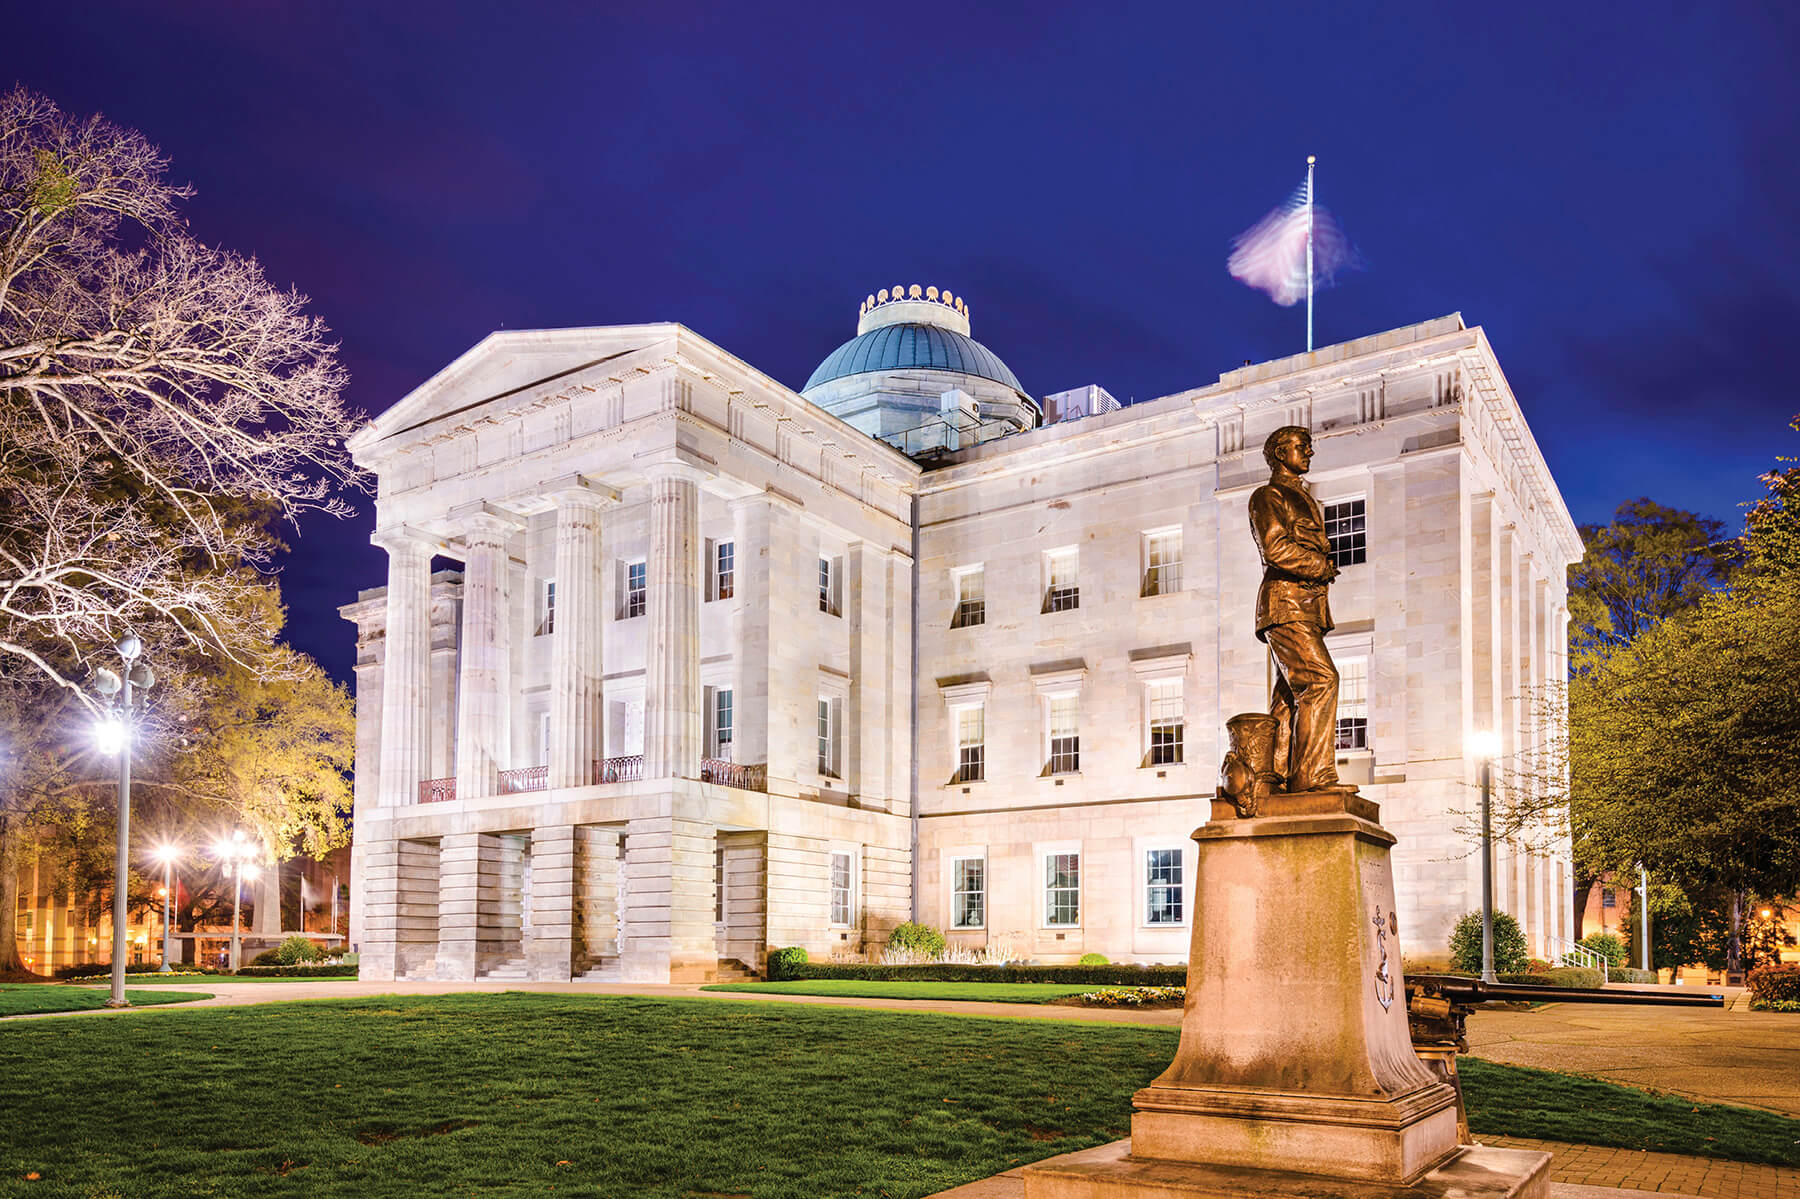 Photo of the Raleigh, North Carolina capitol building